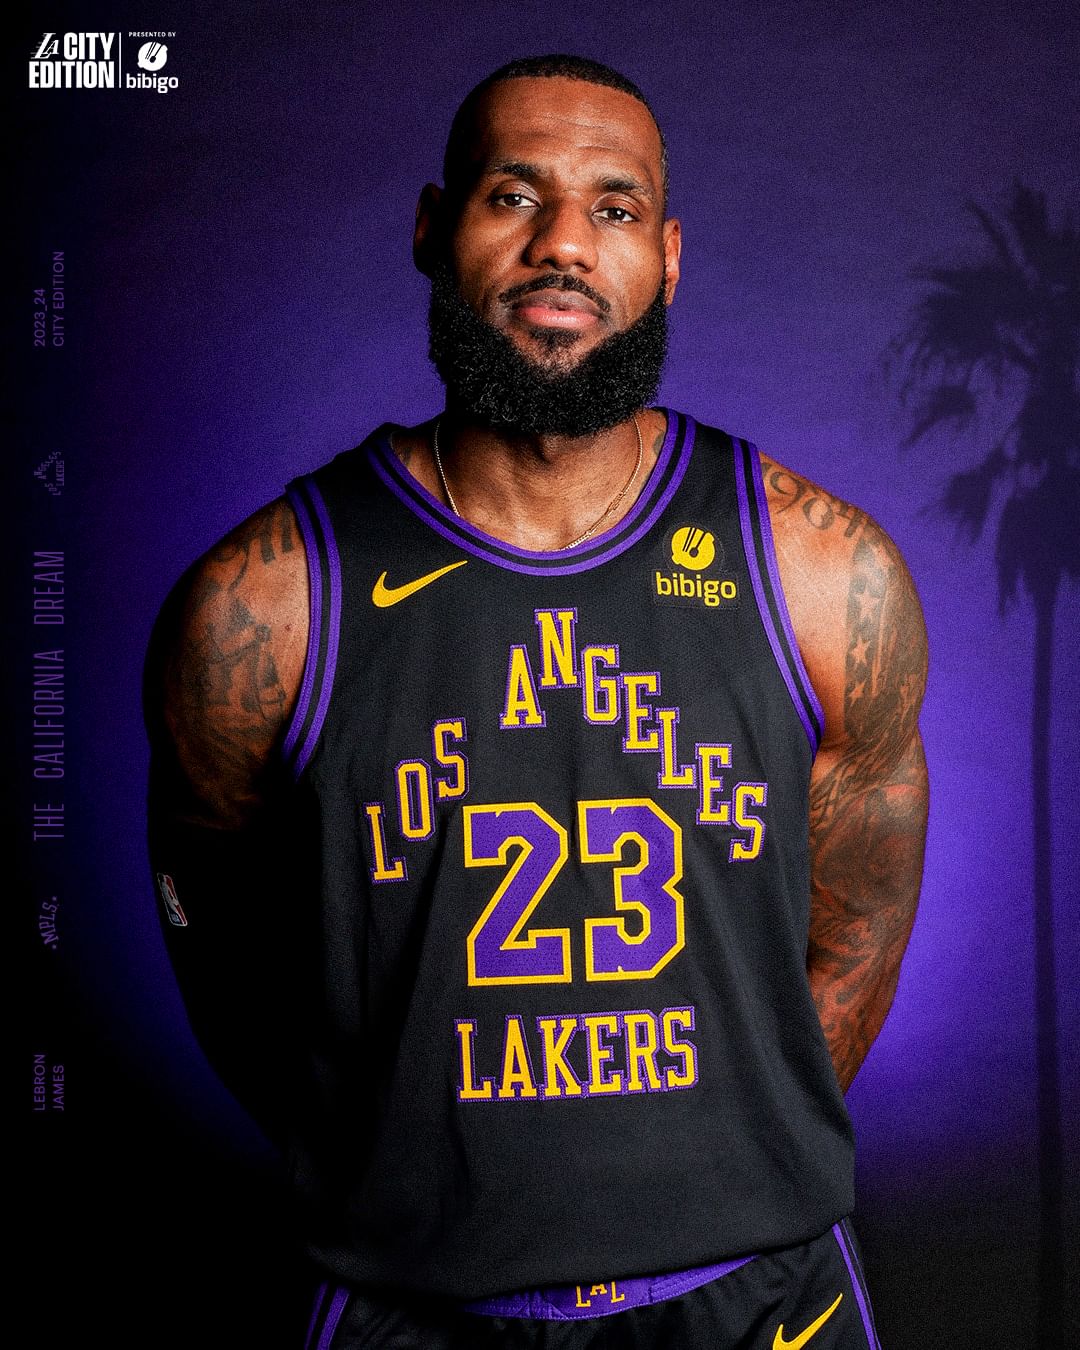 NBA is putting up a significant effort into its City Edition push, which includes the release of Los Angeles Lakers City Edition jerseys